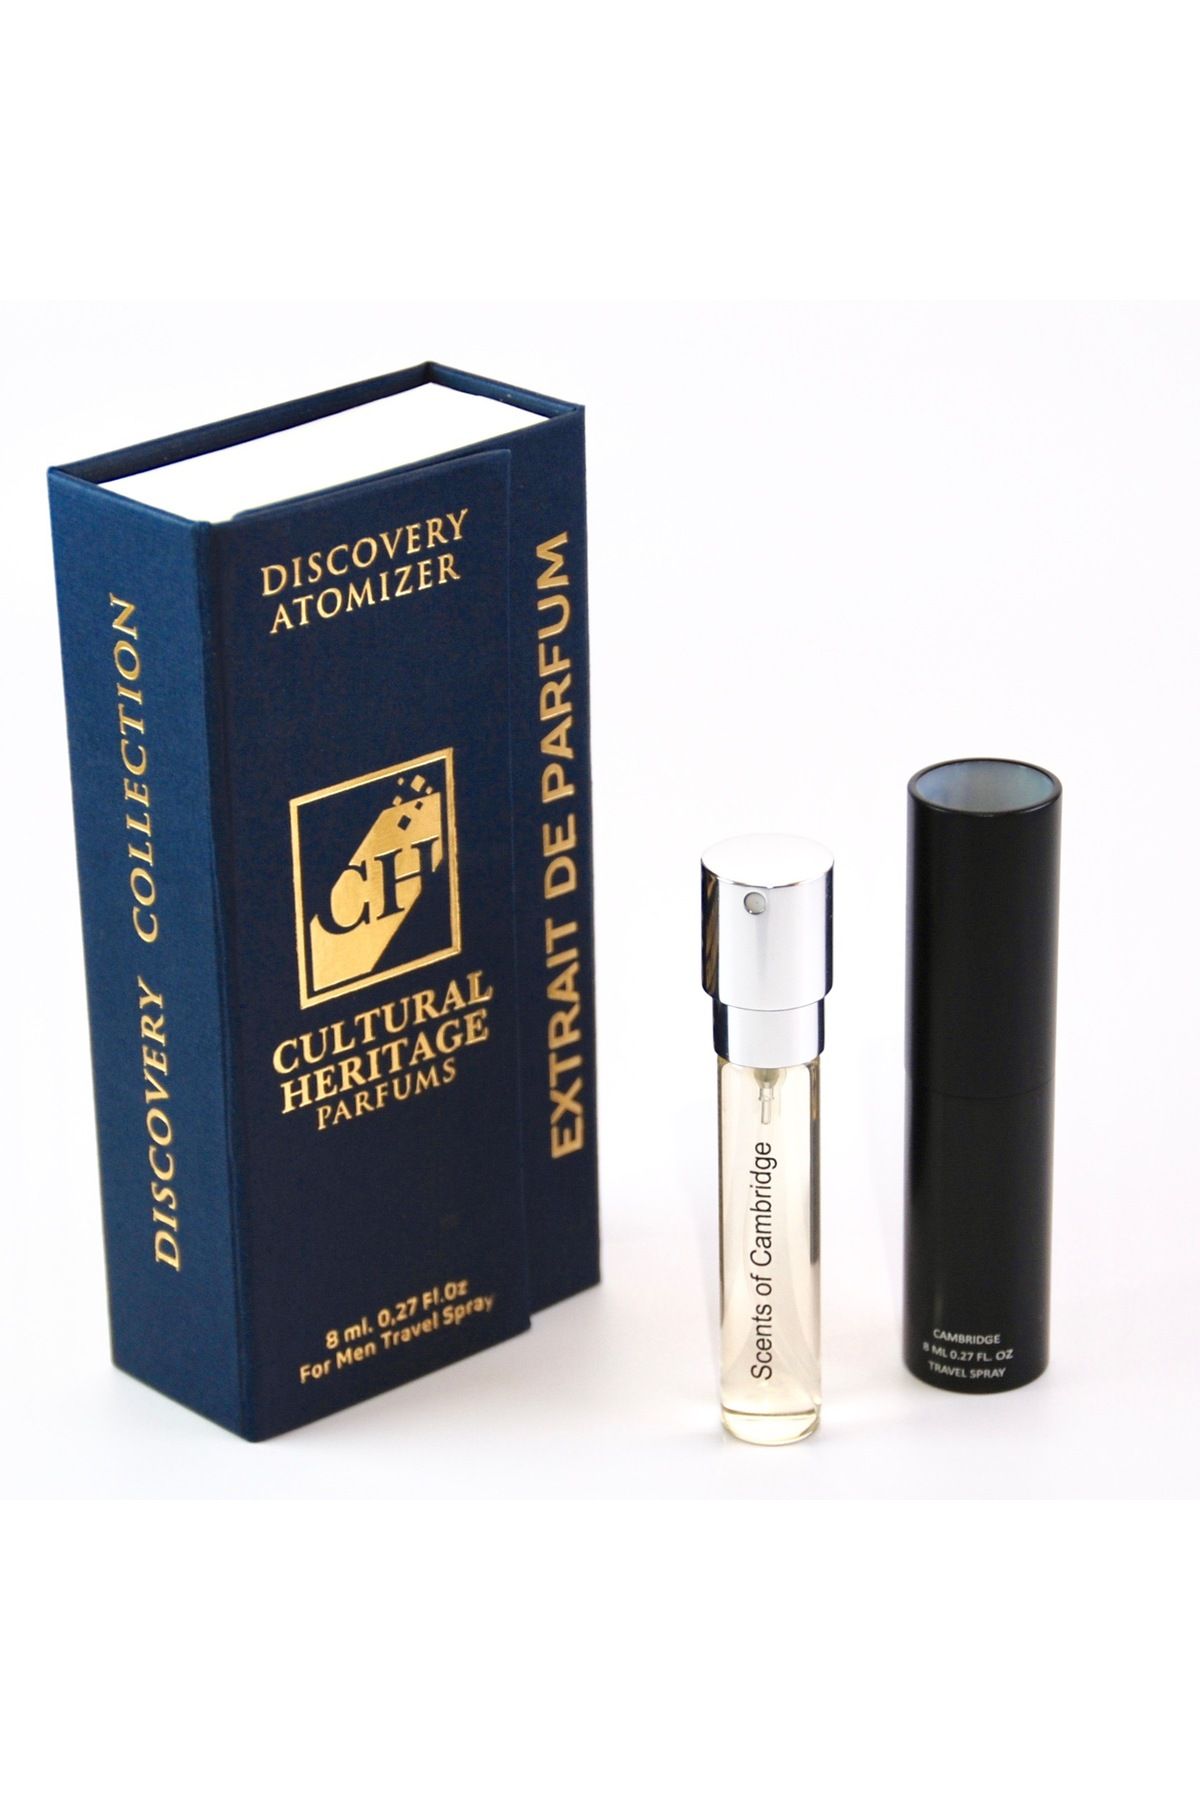 CH CULTURAL HERITAGE , Scents of Cambridge Discovery Atomizer Travel Spray, for Men,